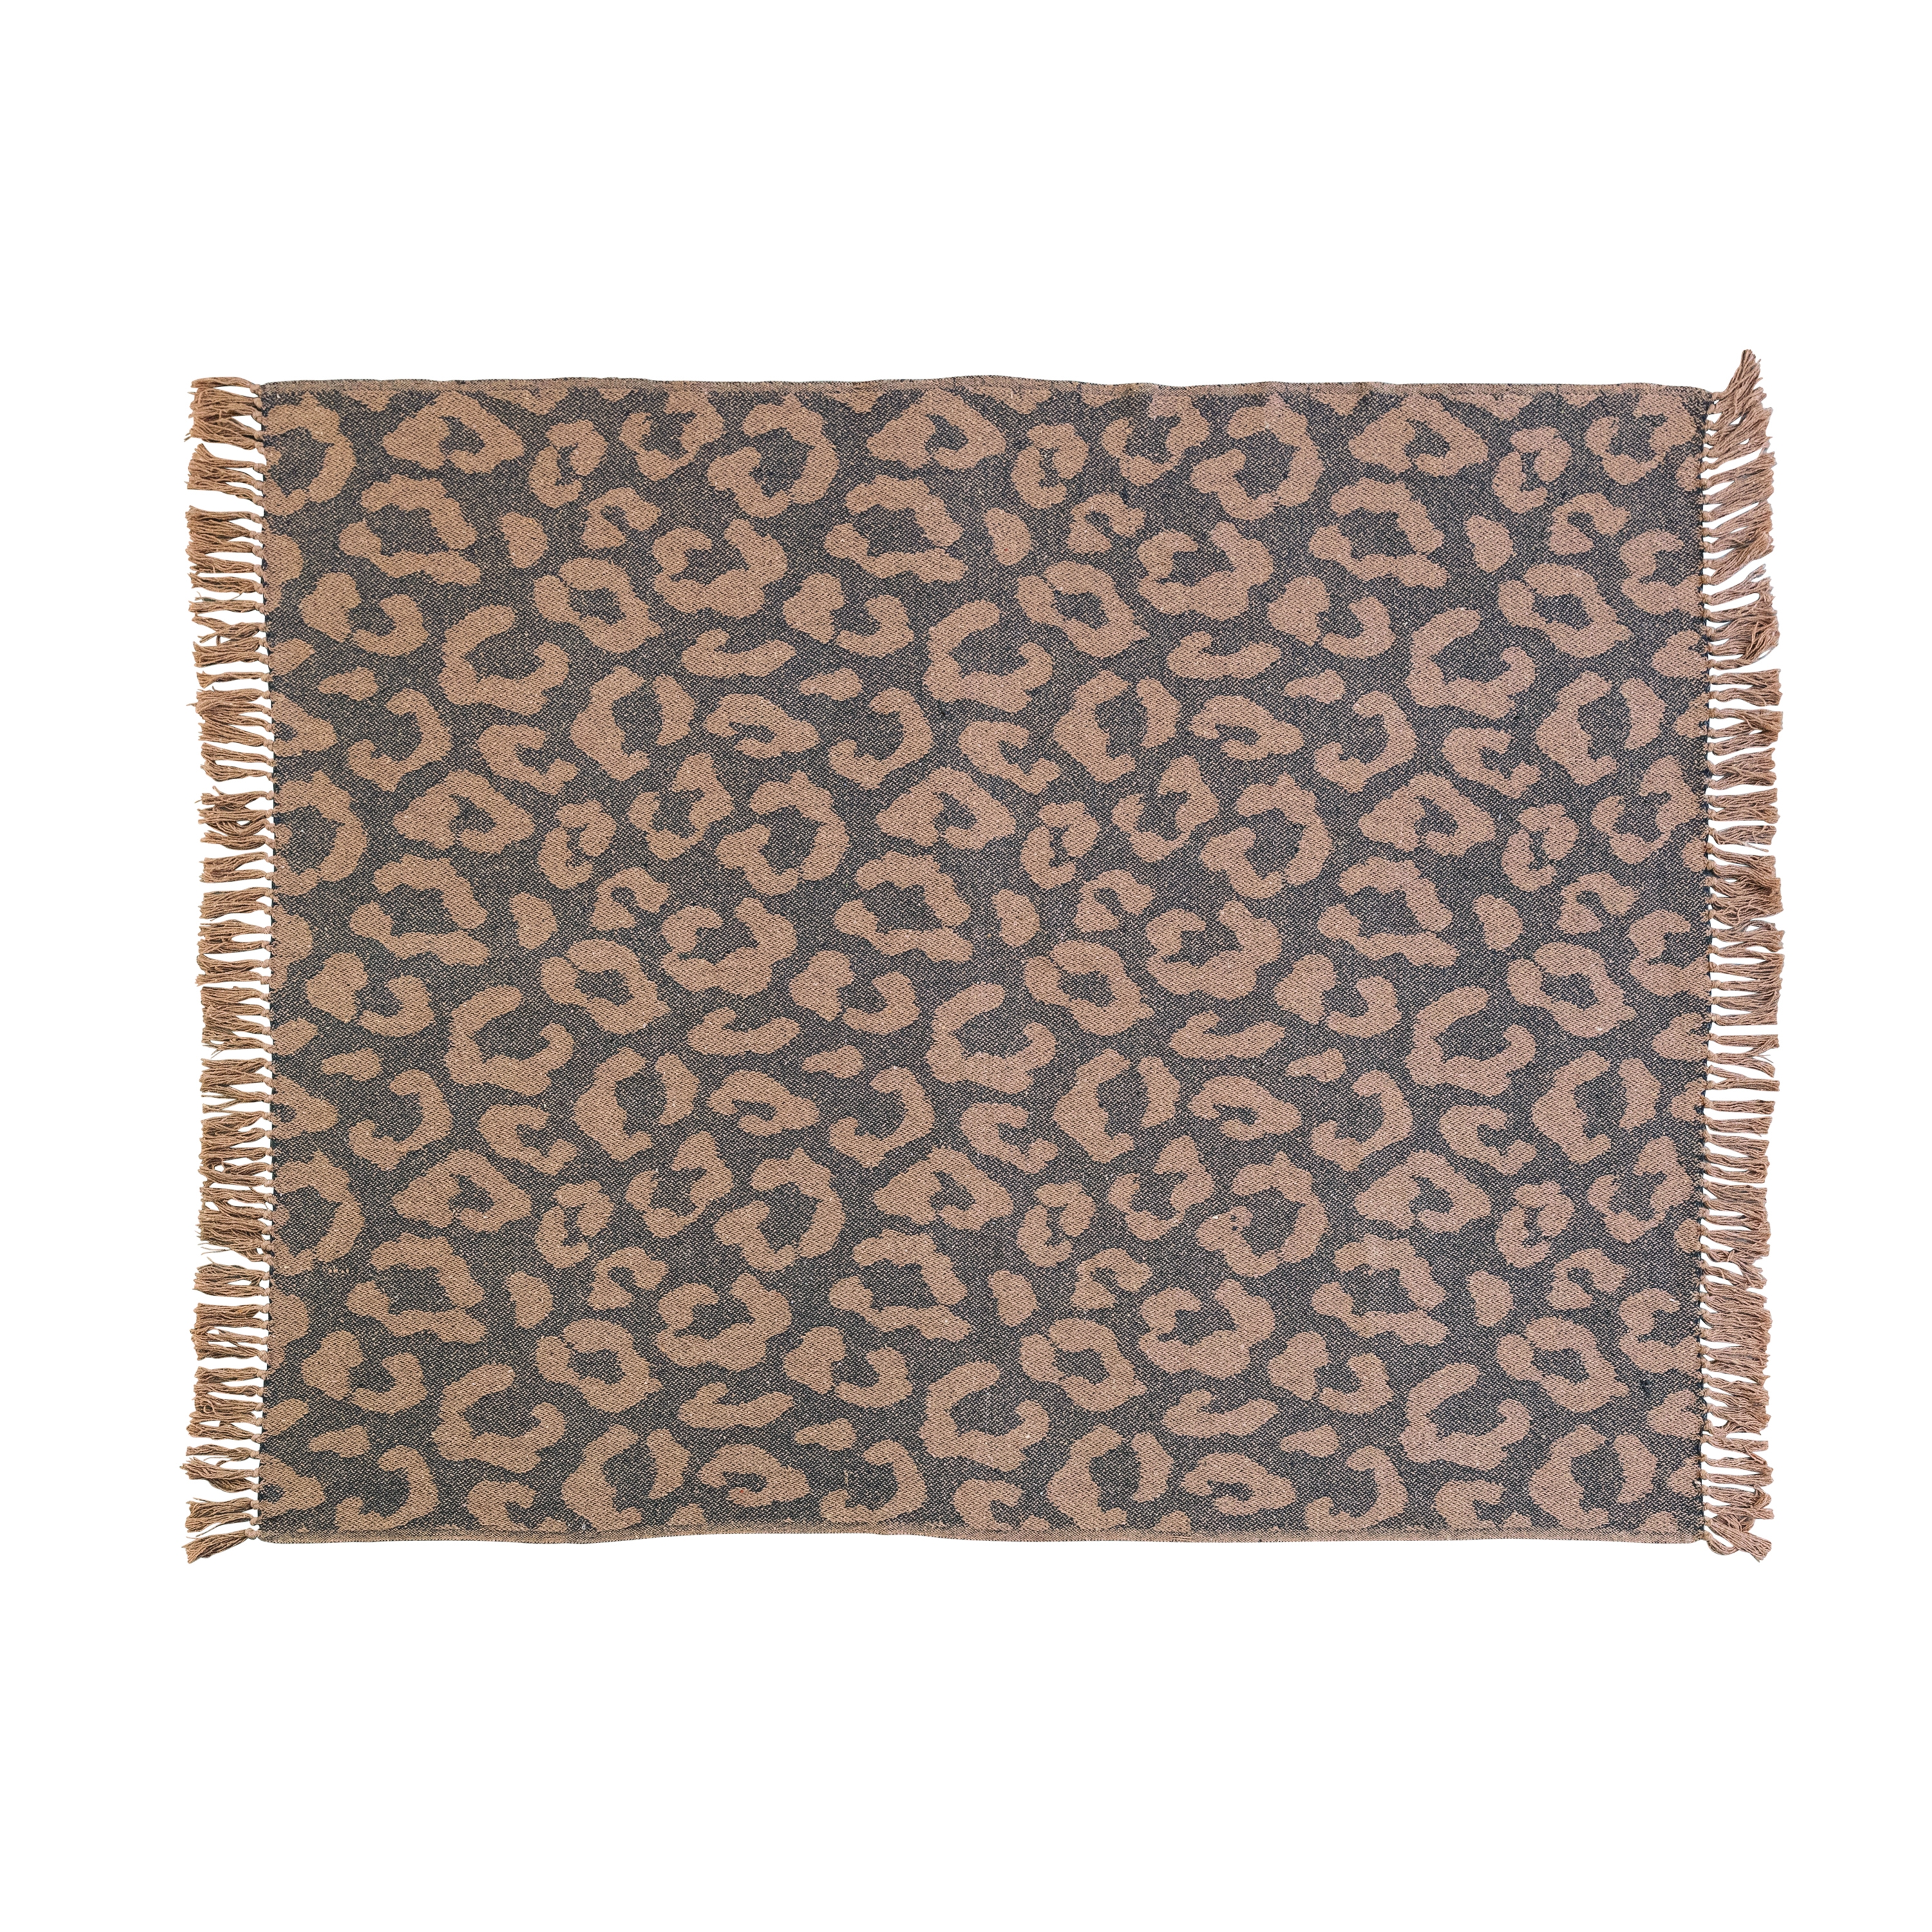 Woven Recycled Cotton Blend Leopard Print Throw with Fringe, Black and Tan - Image 0